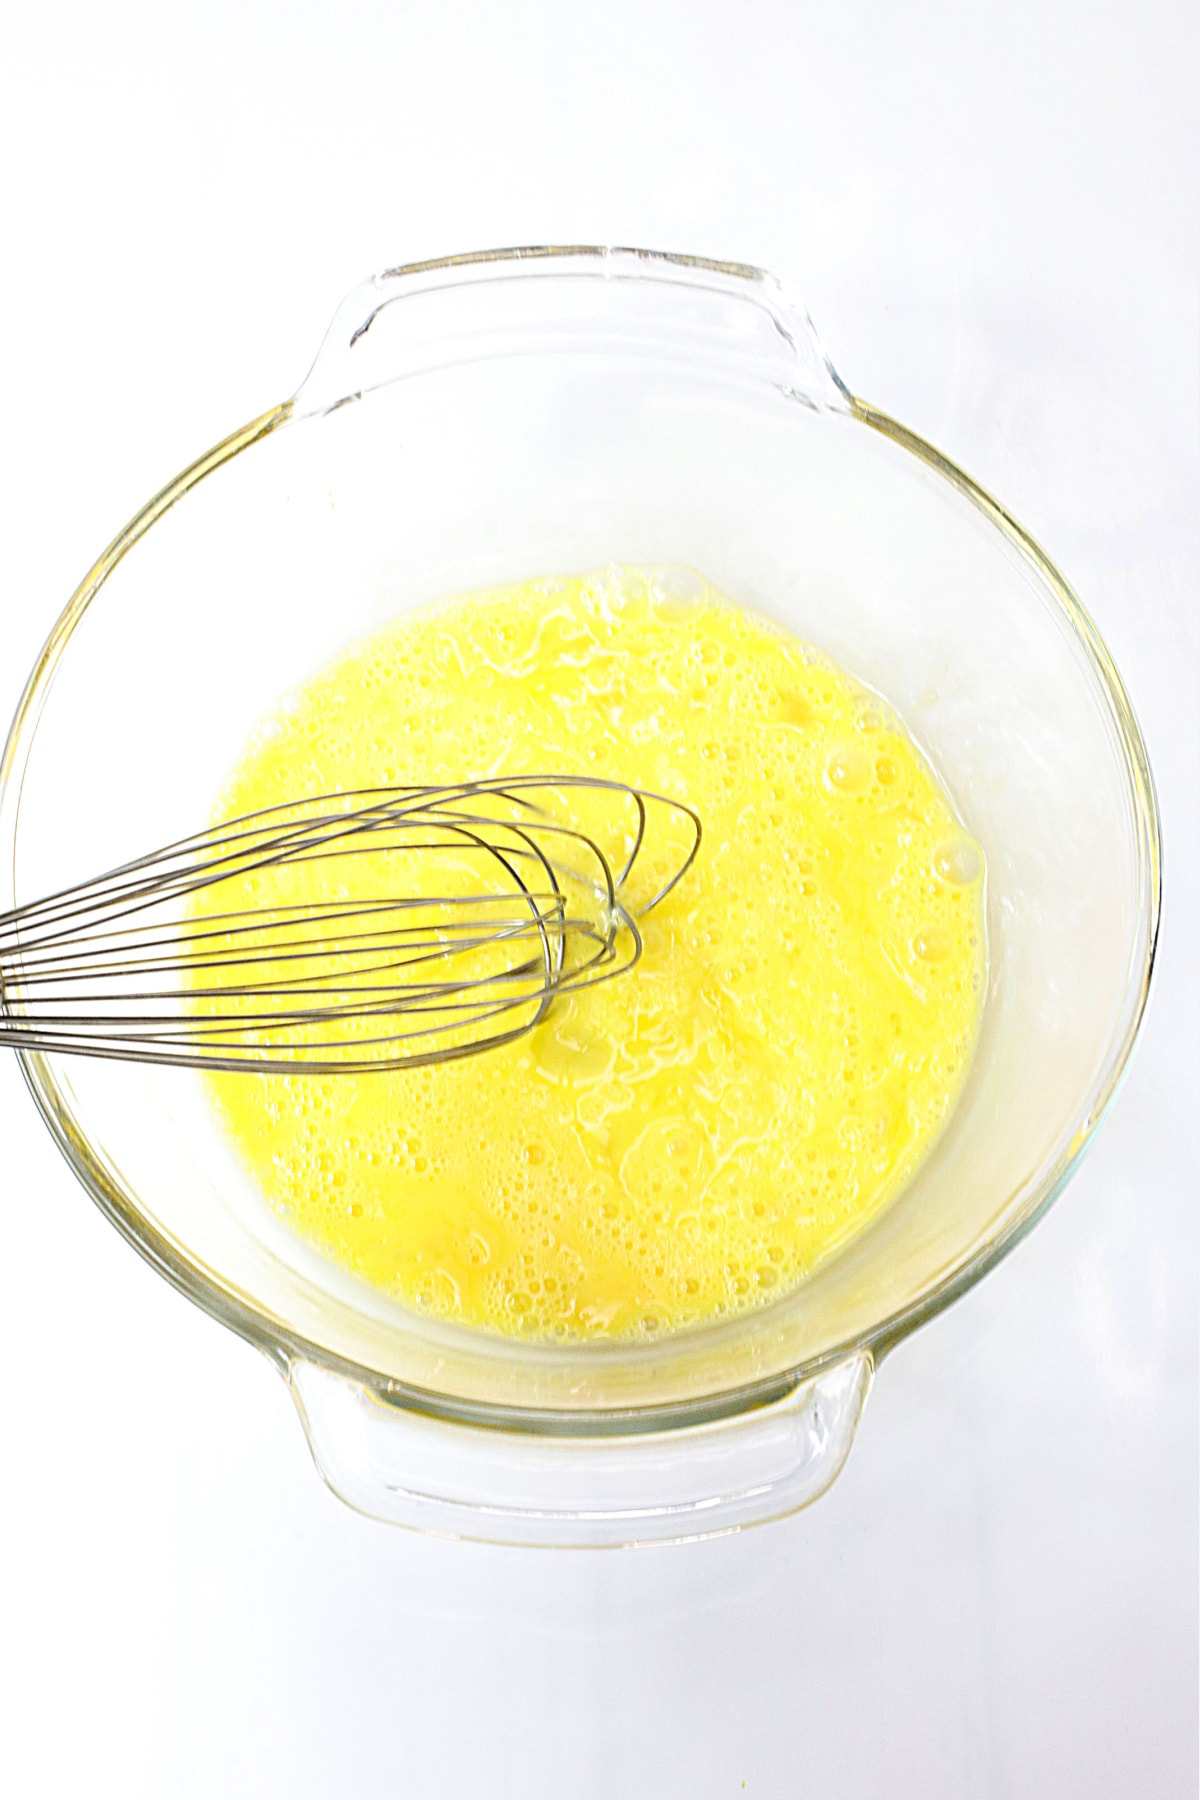 Whisked eggs in glass bowl